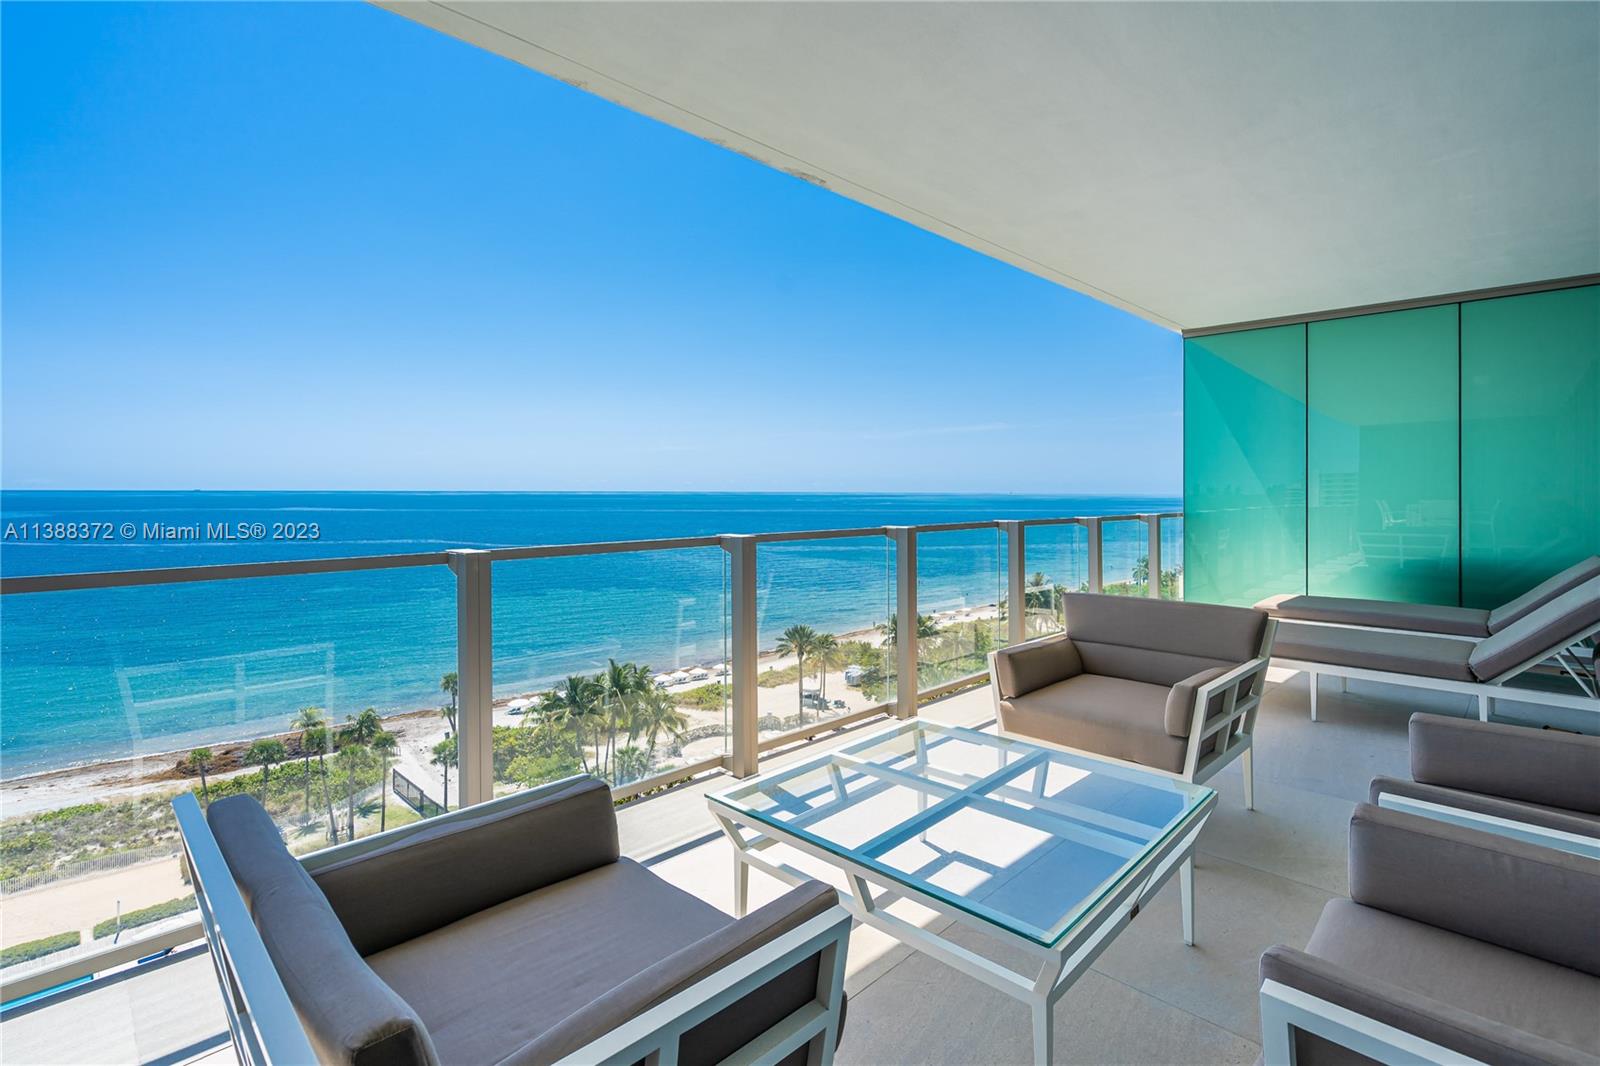 Private elevator opens to one-of-a-kind Beachfront 3BR + Family room + Staff, 5.5BA, 3,600sf unit at the exclusive Oceana in Key Biscayne. Enjoy breathtaking views from this finely finished flow-through unit, encompassing sparkling city views and serene beach views through floor-to-ceiling windows and expansive terraces. Finely finished and fully automized home, with all walls featuring wood panels, wallpapers & venetian plaster, linear AC ducts, integrated speakers, Italian doors. Kitchen features long island w/Miele & Subzero appl. & wine cooler. Oceana offers a grand pool and exercise pool, beach services, al-fresco beachfront Restaurant, Tennis court, gym and spa with ocean views, kids playroom, party & media rooms, 24hr security & valet and volleyball on its 500 ft private beach.